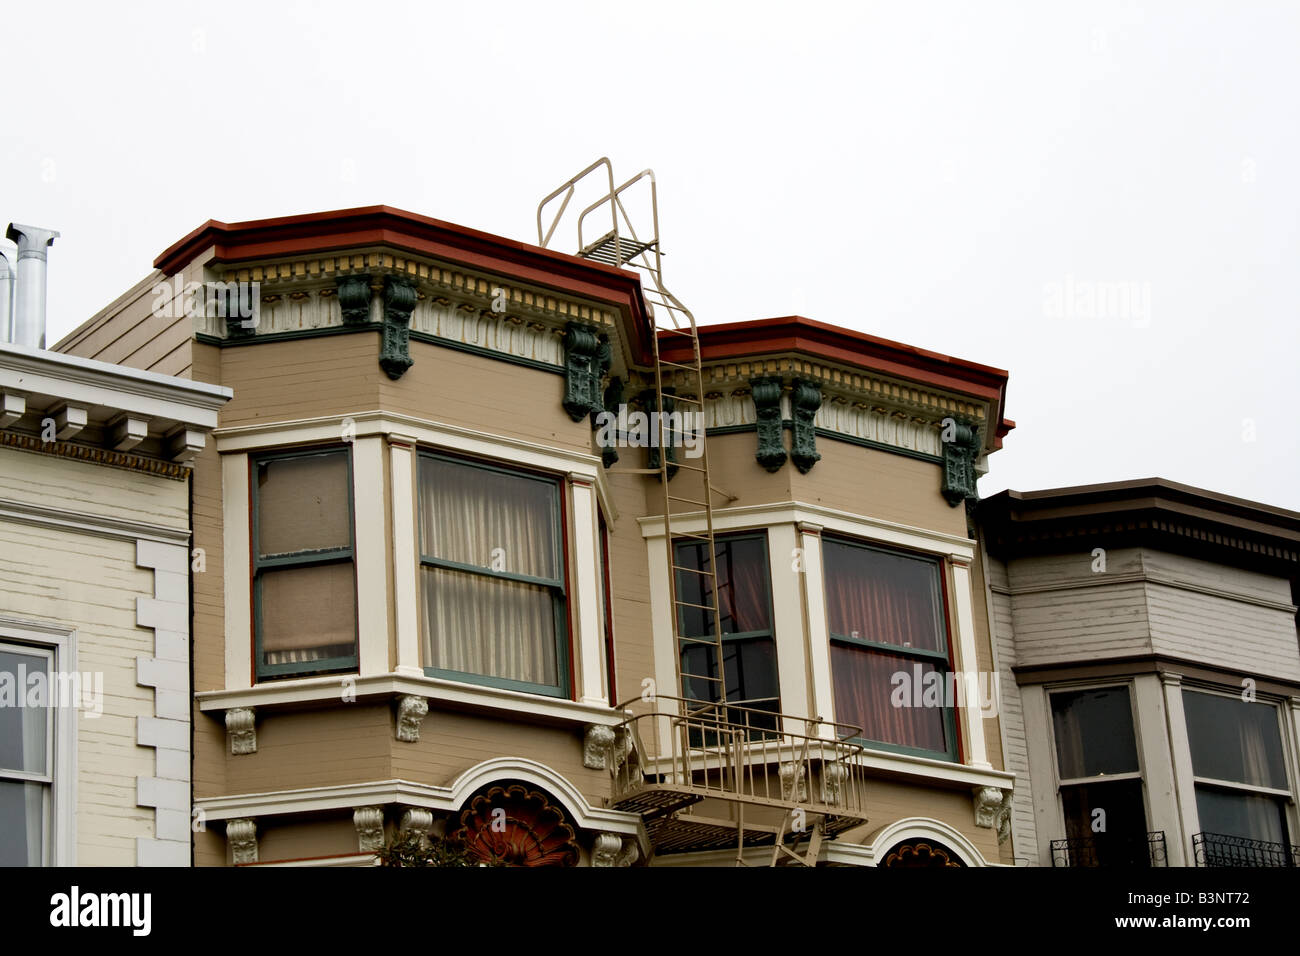 Fire escape at the front of buildings in San Francisco, California Stock Photo